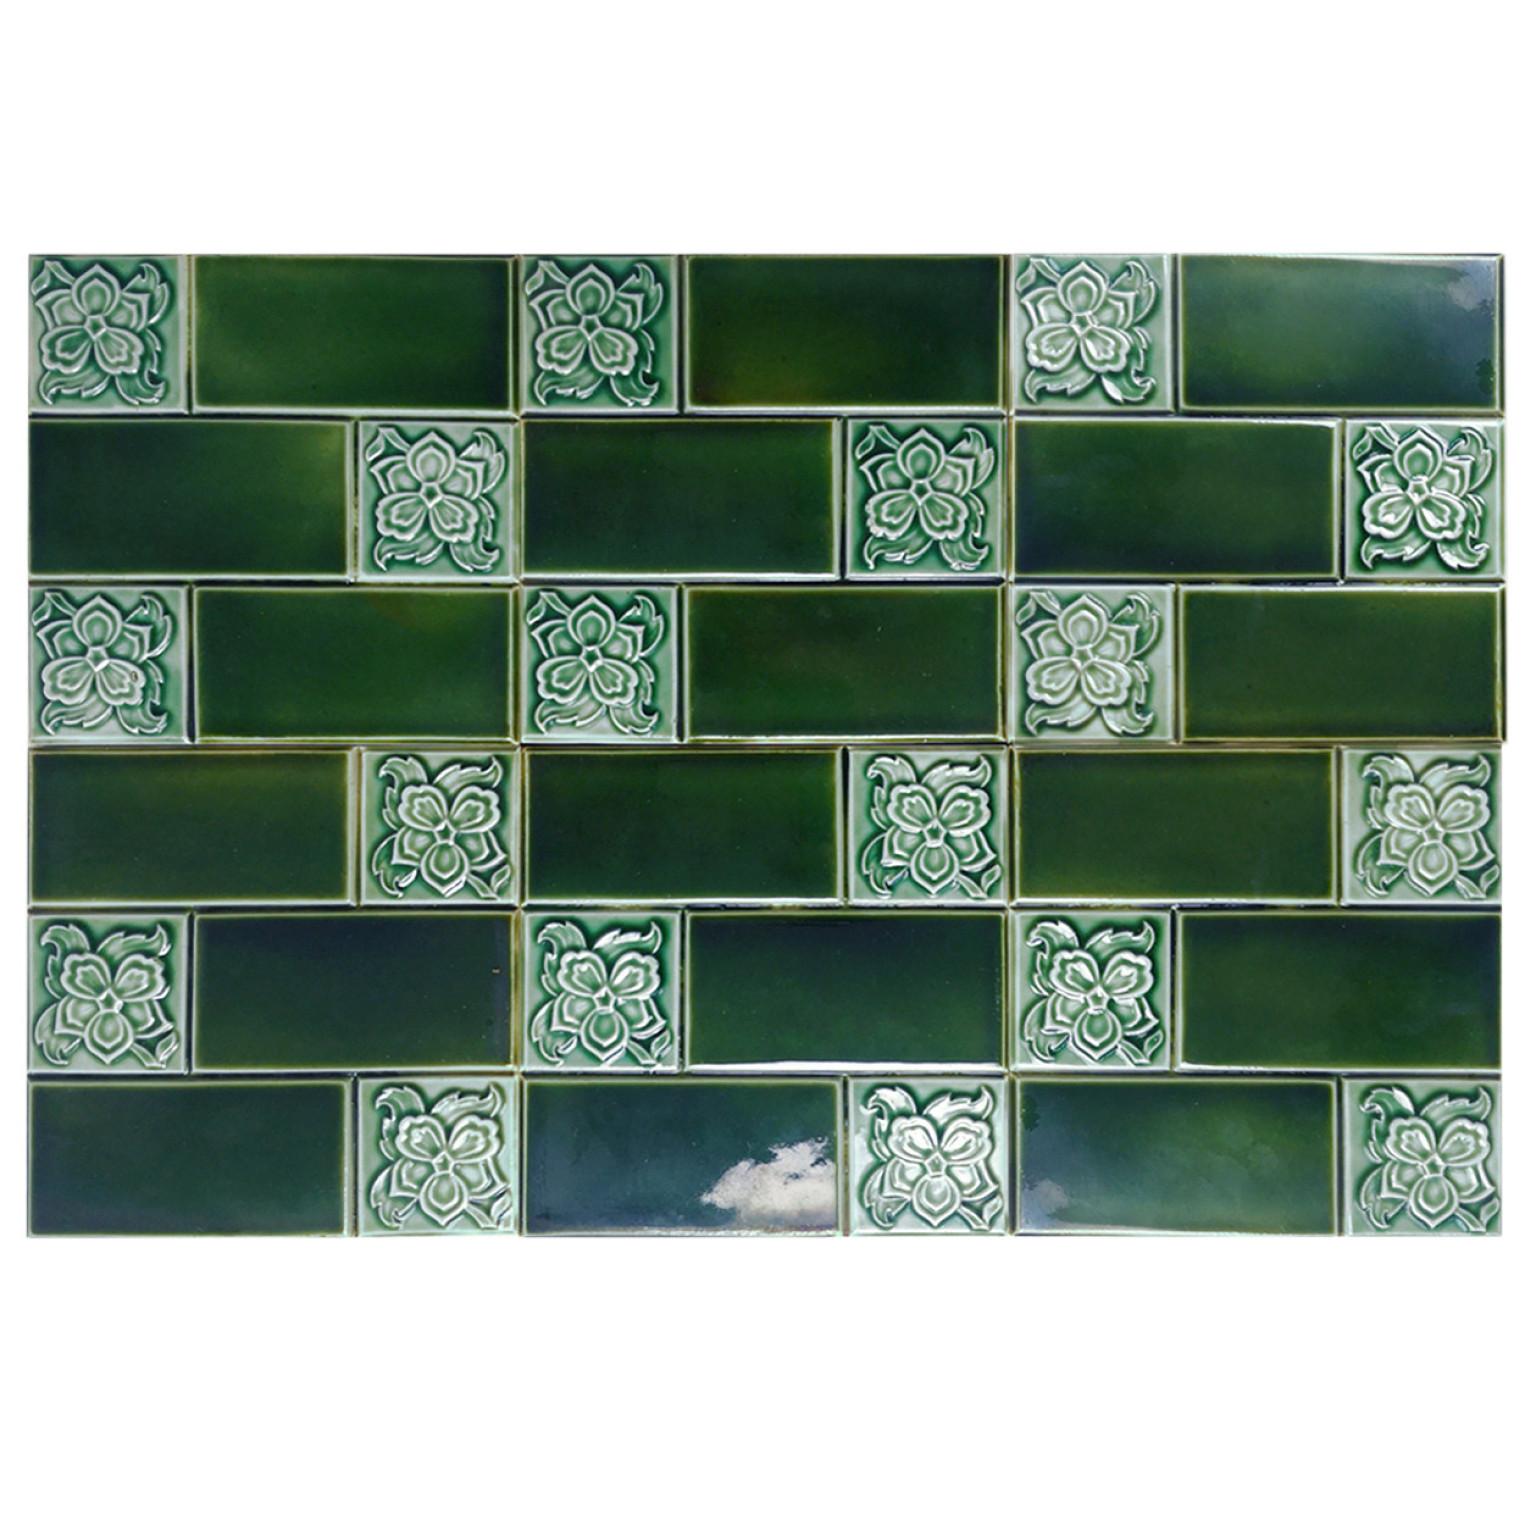 Amazing set of handmade tiles in rich green colors. Each tile is divided into six faces. Manufactured early 20th century, Belgium.
These tiles would be charming displayed on easels, framed or incorporated into a custom tile design.

Please note